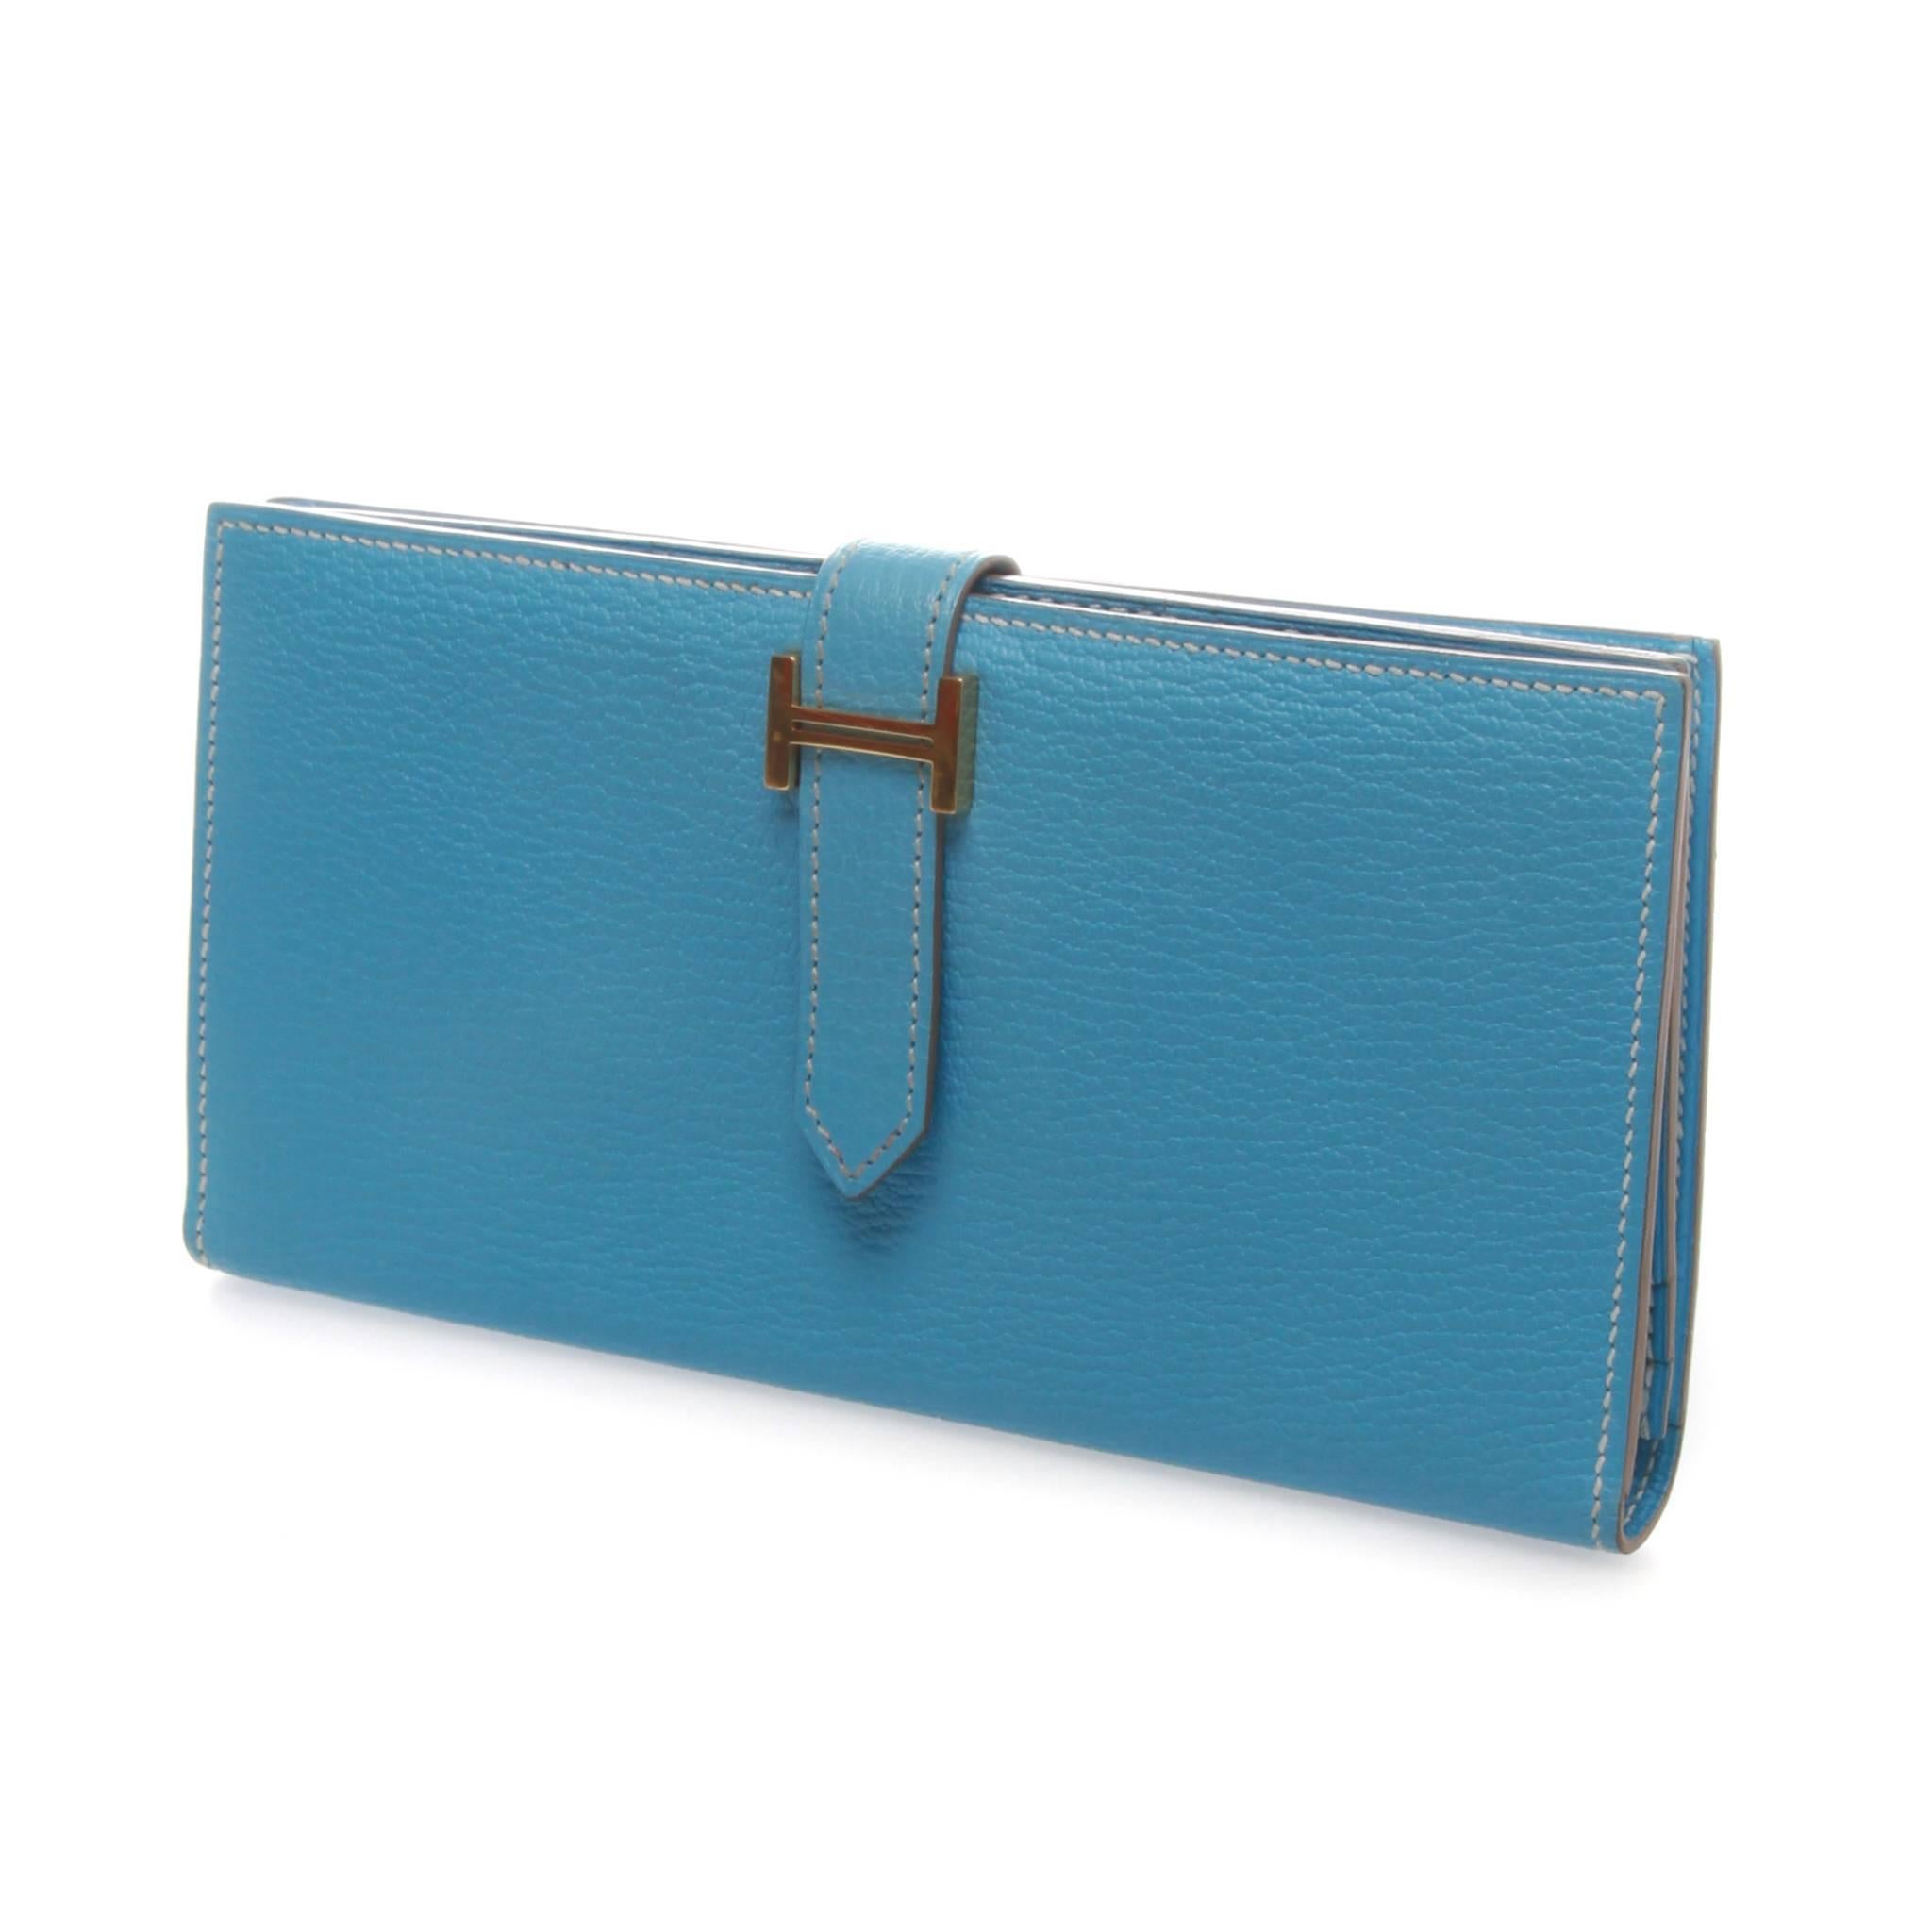 An exceptional Hermès Béarn Ladies Wallet.

A Soufflet wallet in blue paradise Epsom calfskin, gold palladium-plated H tab & leather strap closure, 
1 change purse with zipper, 5 credit card slots, 3 additional pockets, soufflet/gusset for notes